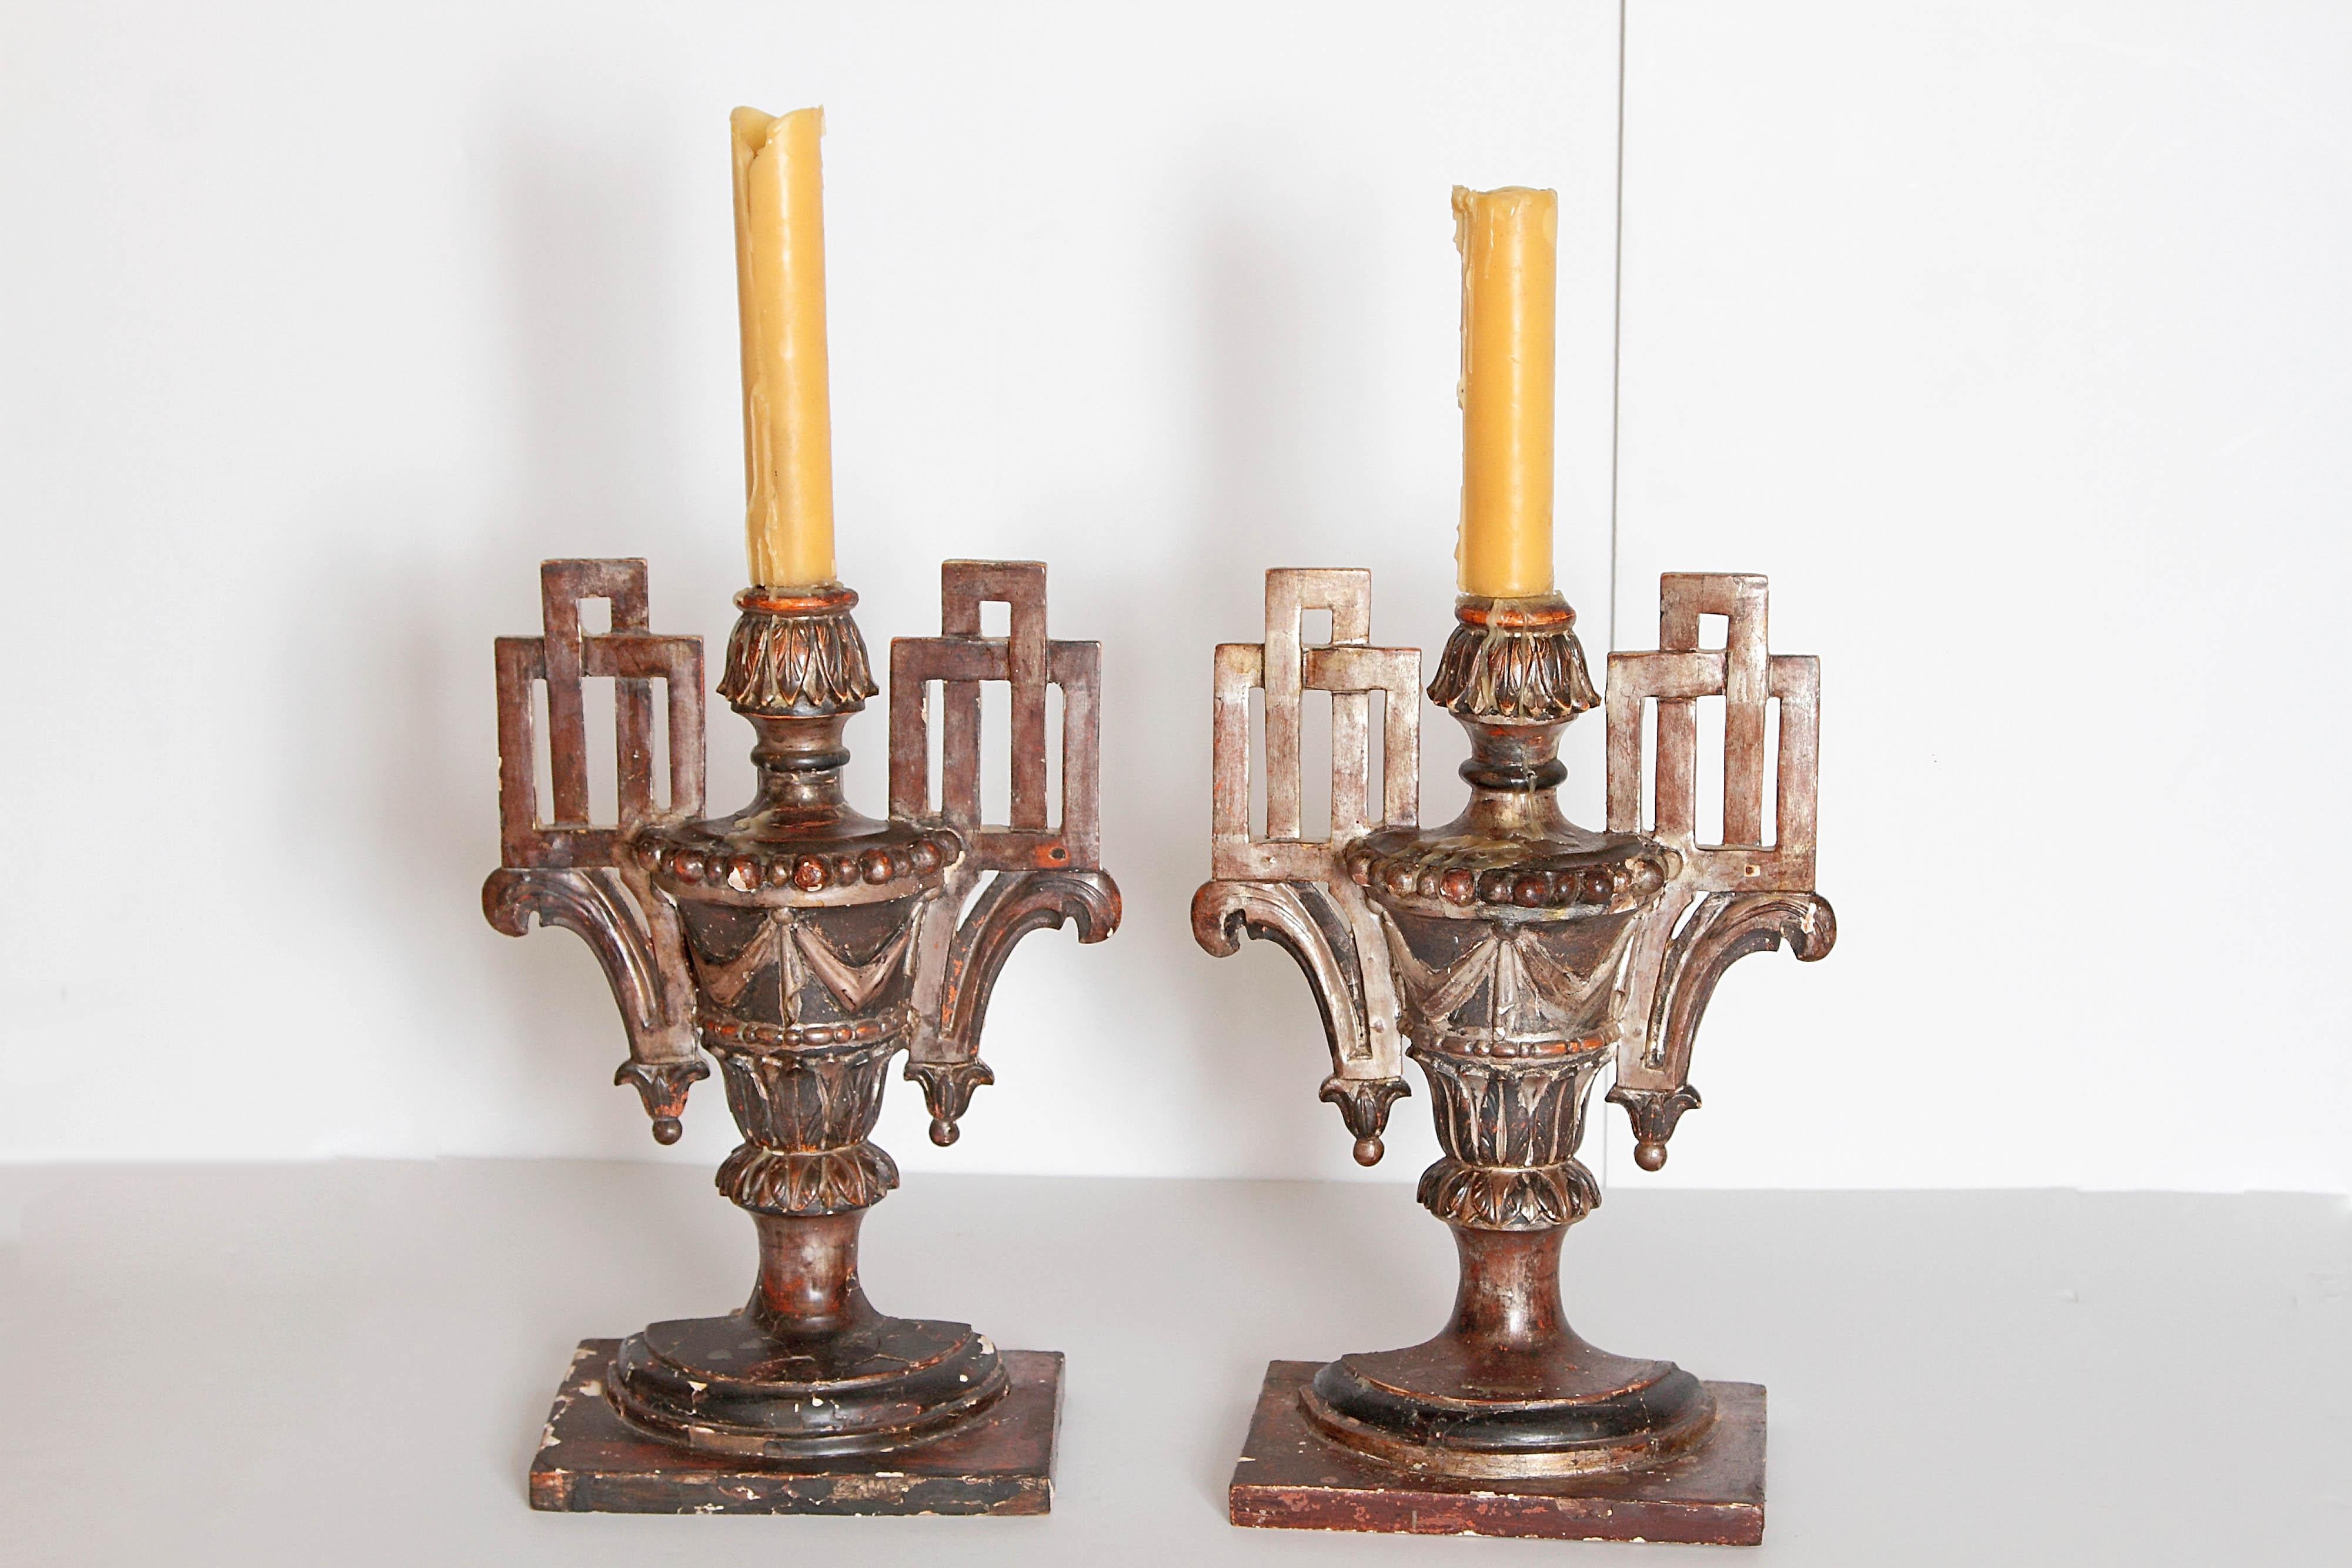 A pair of late 18th century Italian giltwood candleholders. Central carved urn form flanked by Greek key forms. Made to fit against the wall, late 18th century, Italy.